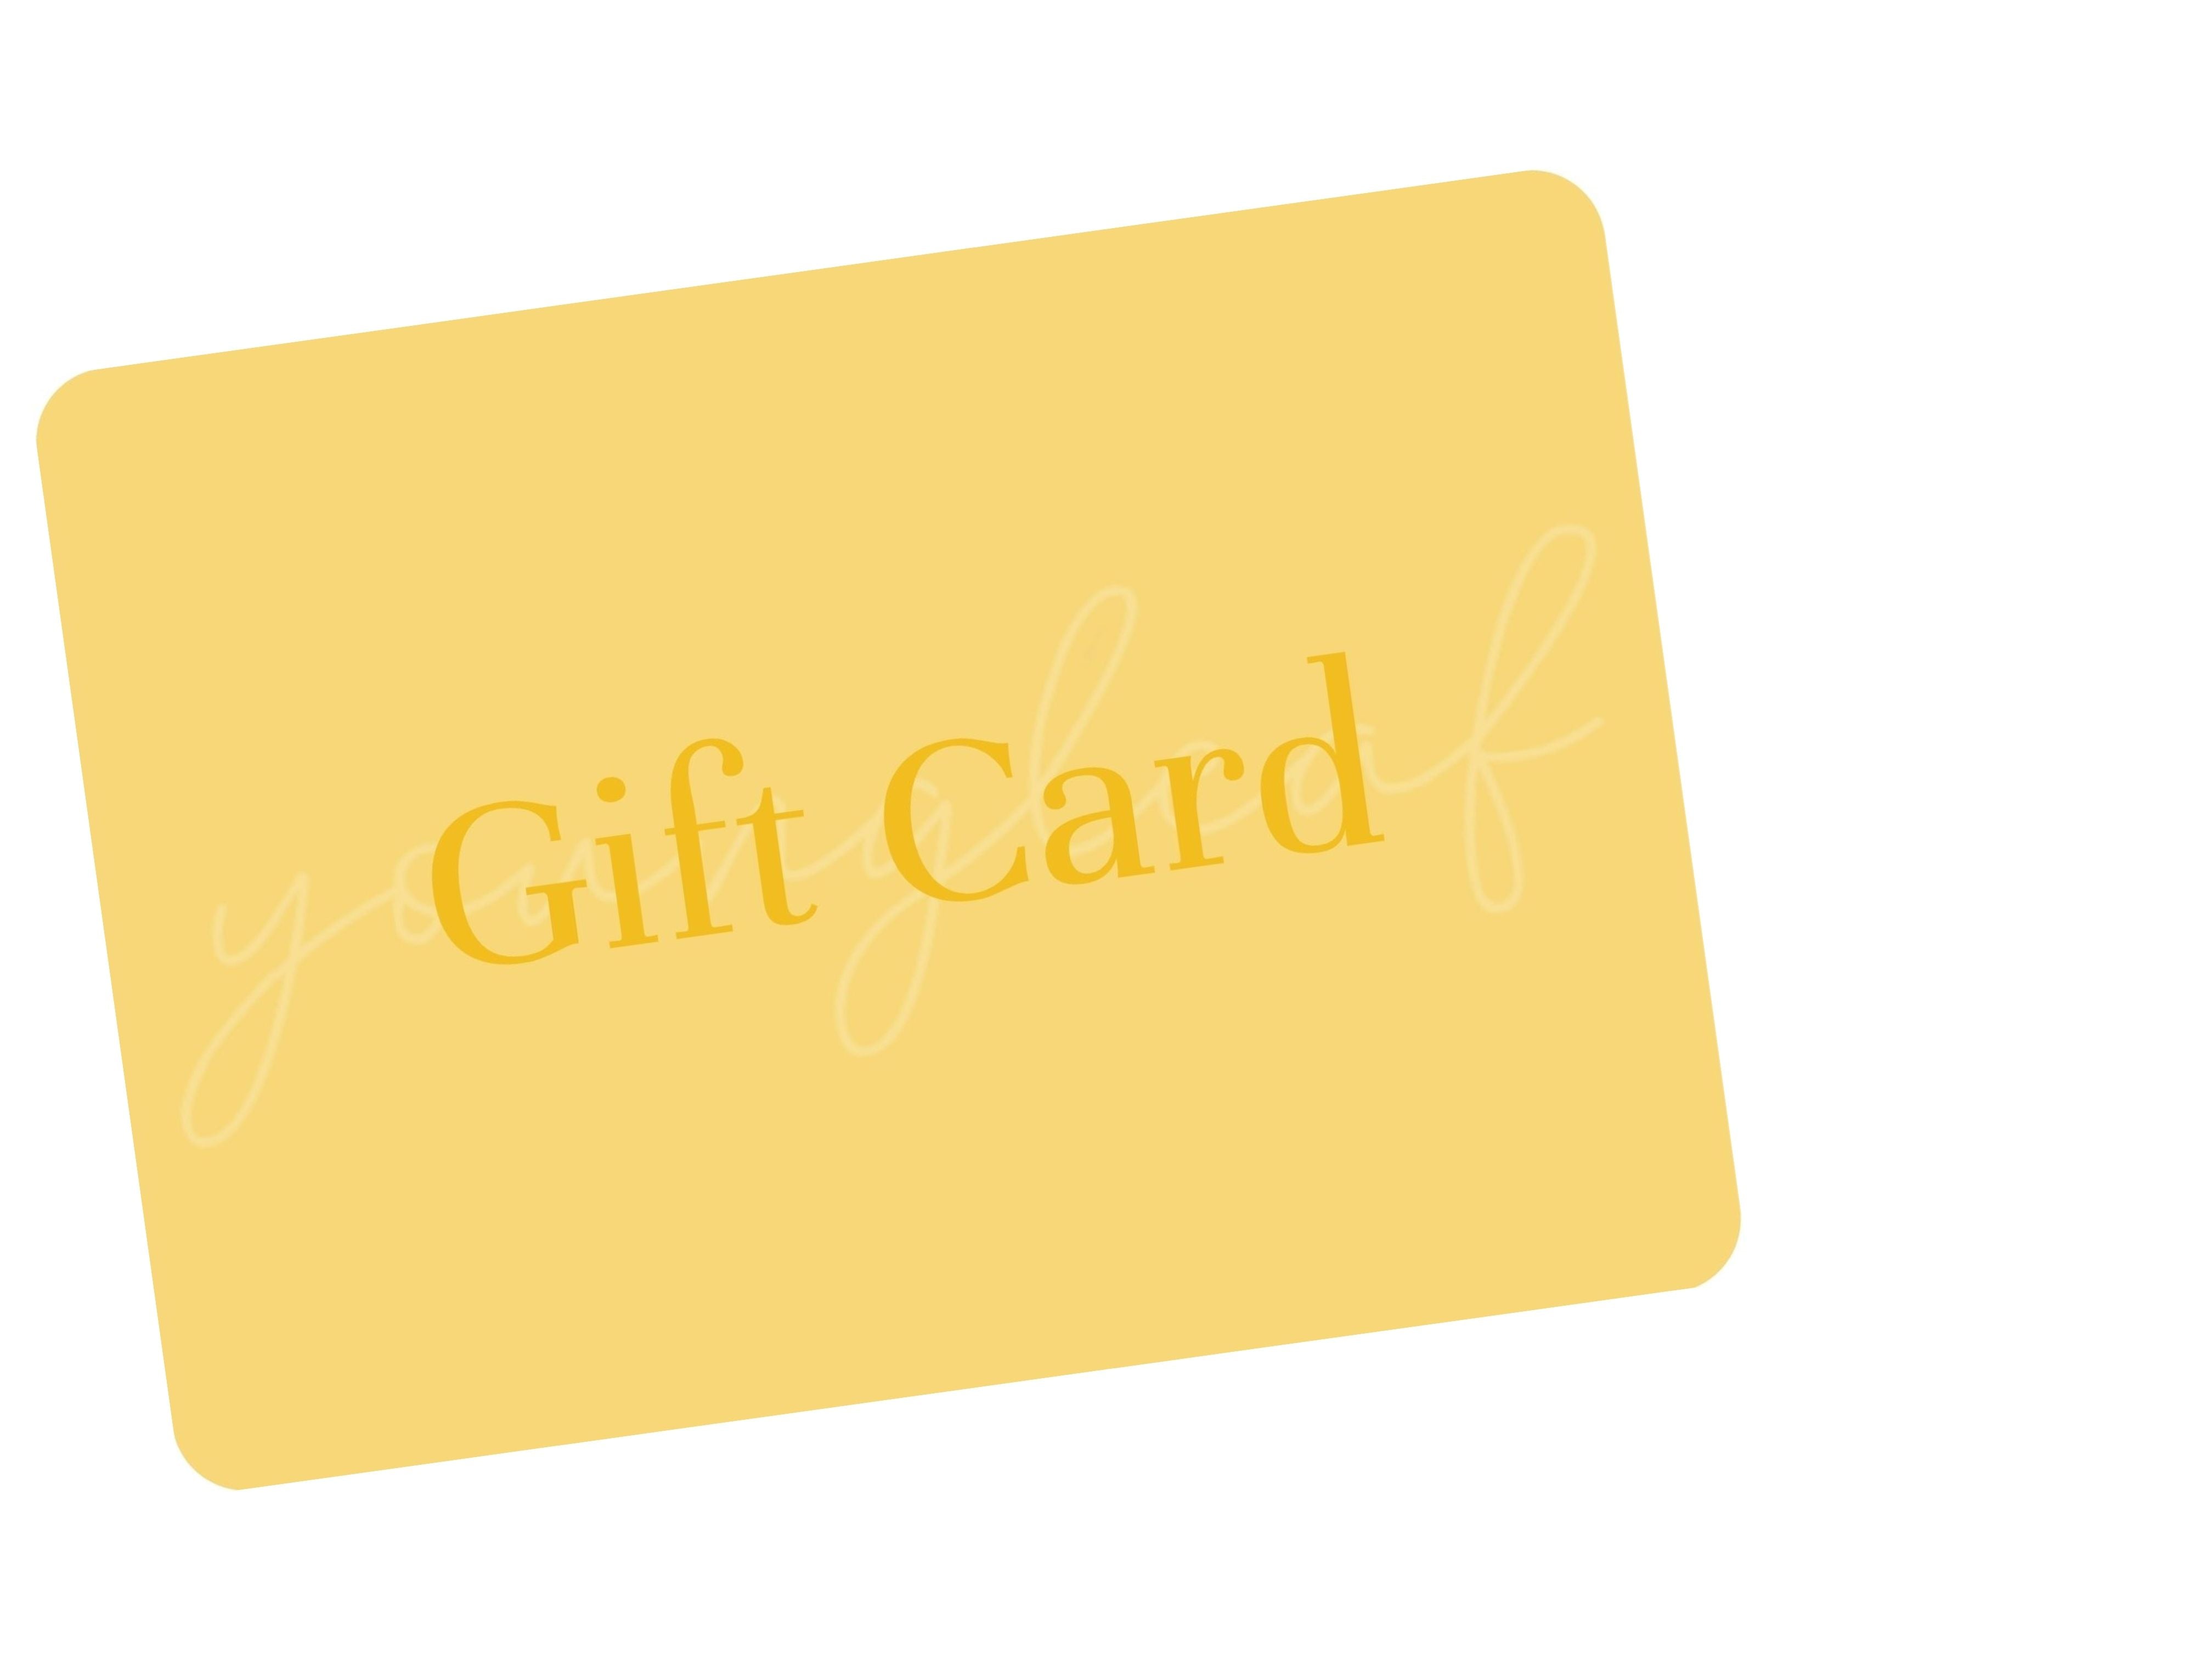 Plant Gift card 